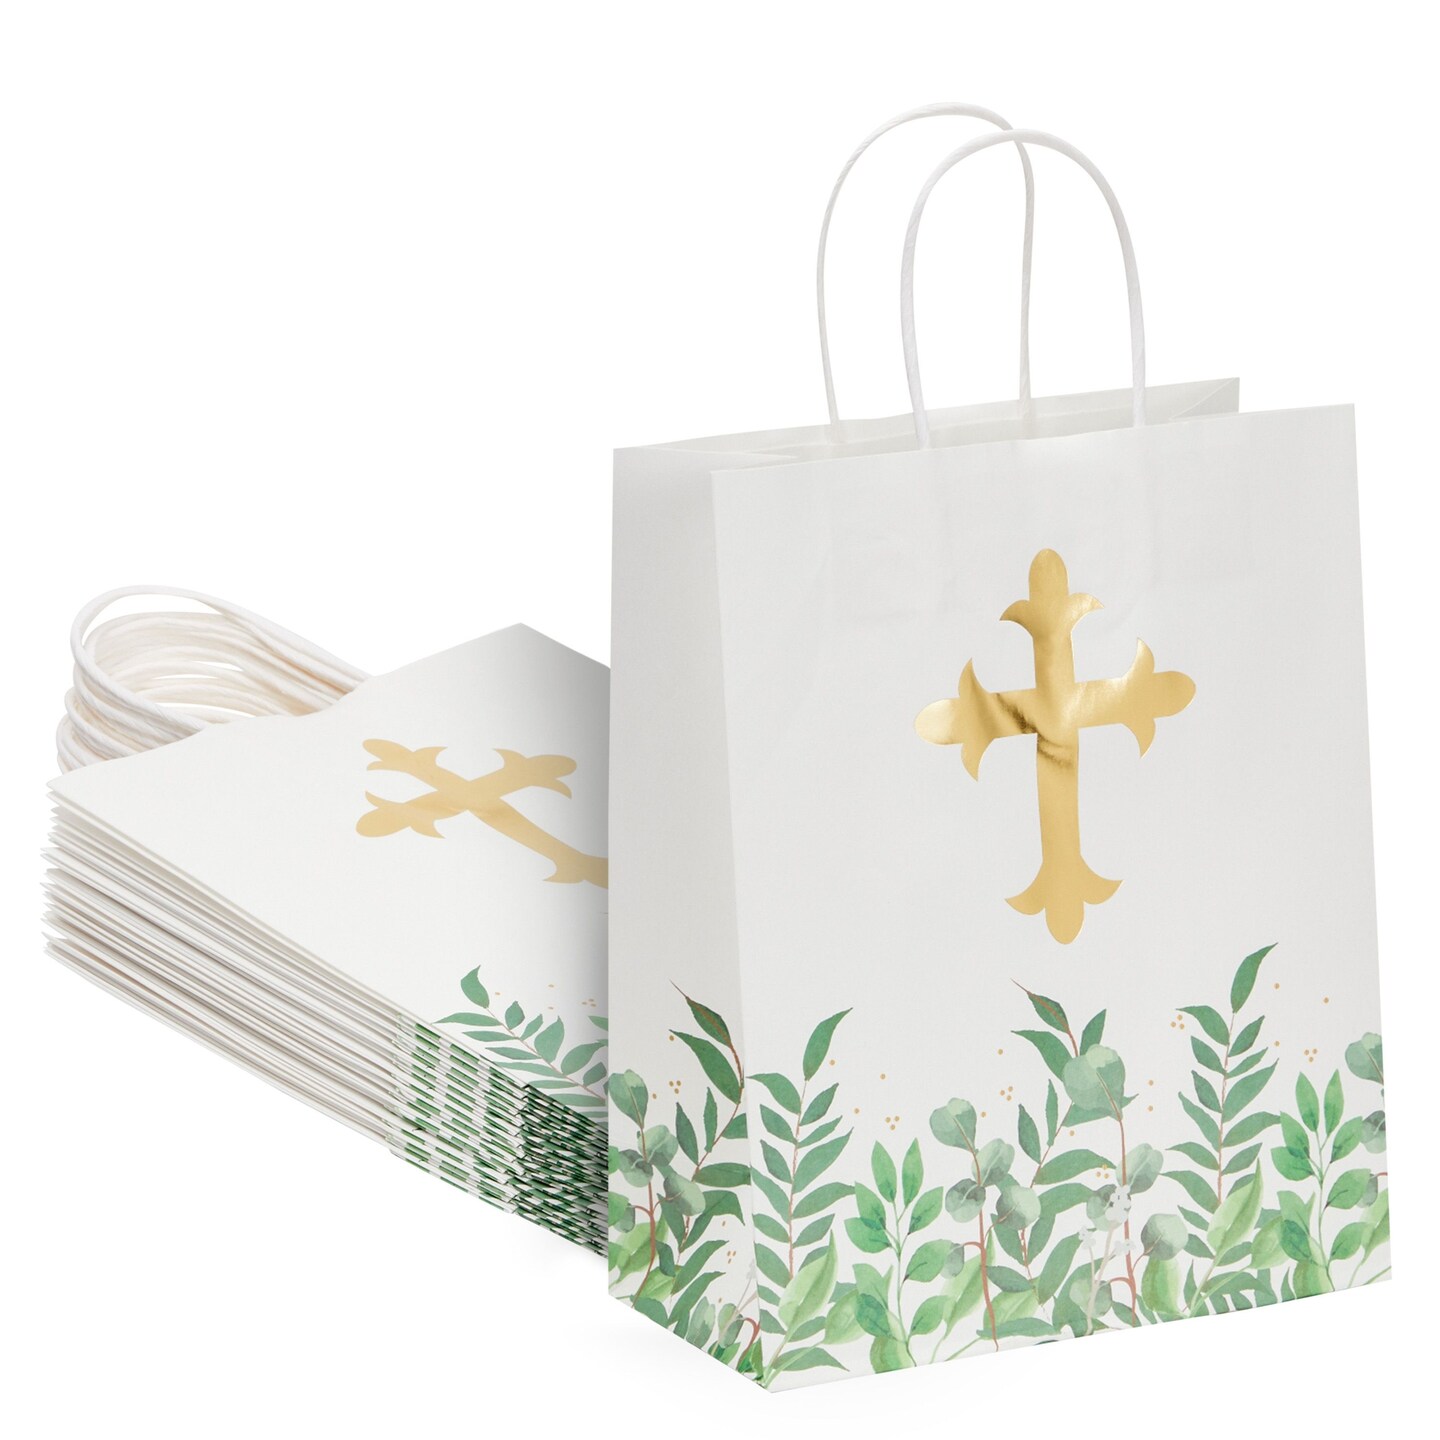 15 Pack of Religious Party Favor Gift Bags for Easter Christening Gifts, for Girls and Boys Baptism, First Communion, Confirmation Gift Bags (10 x 8 x 4 Inches)